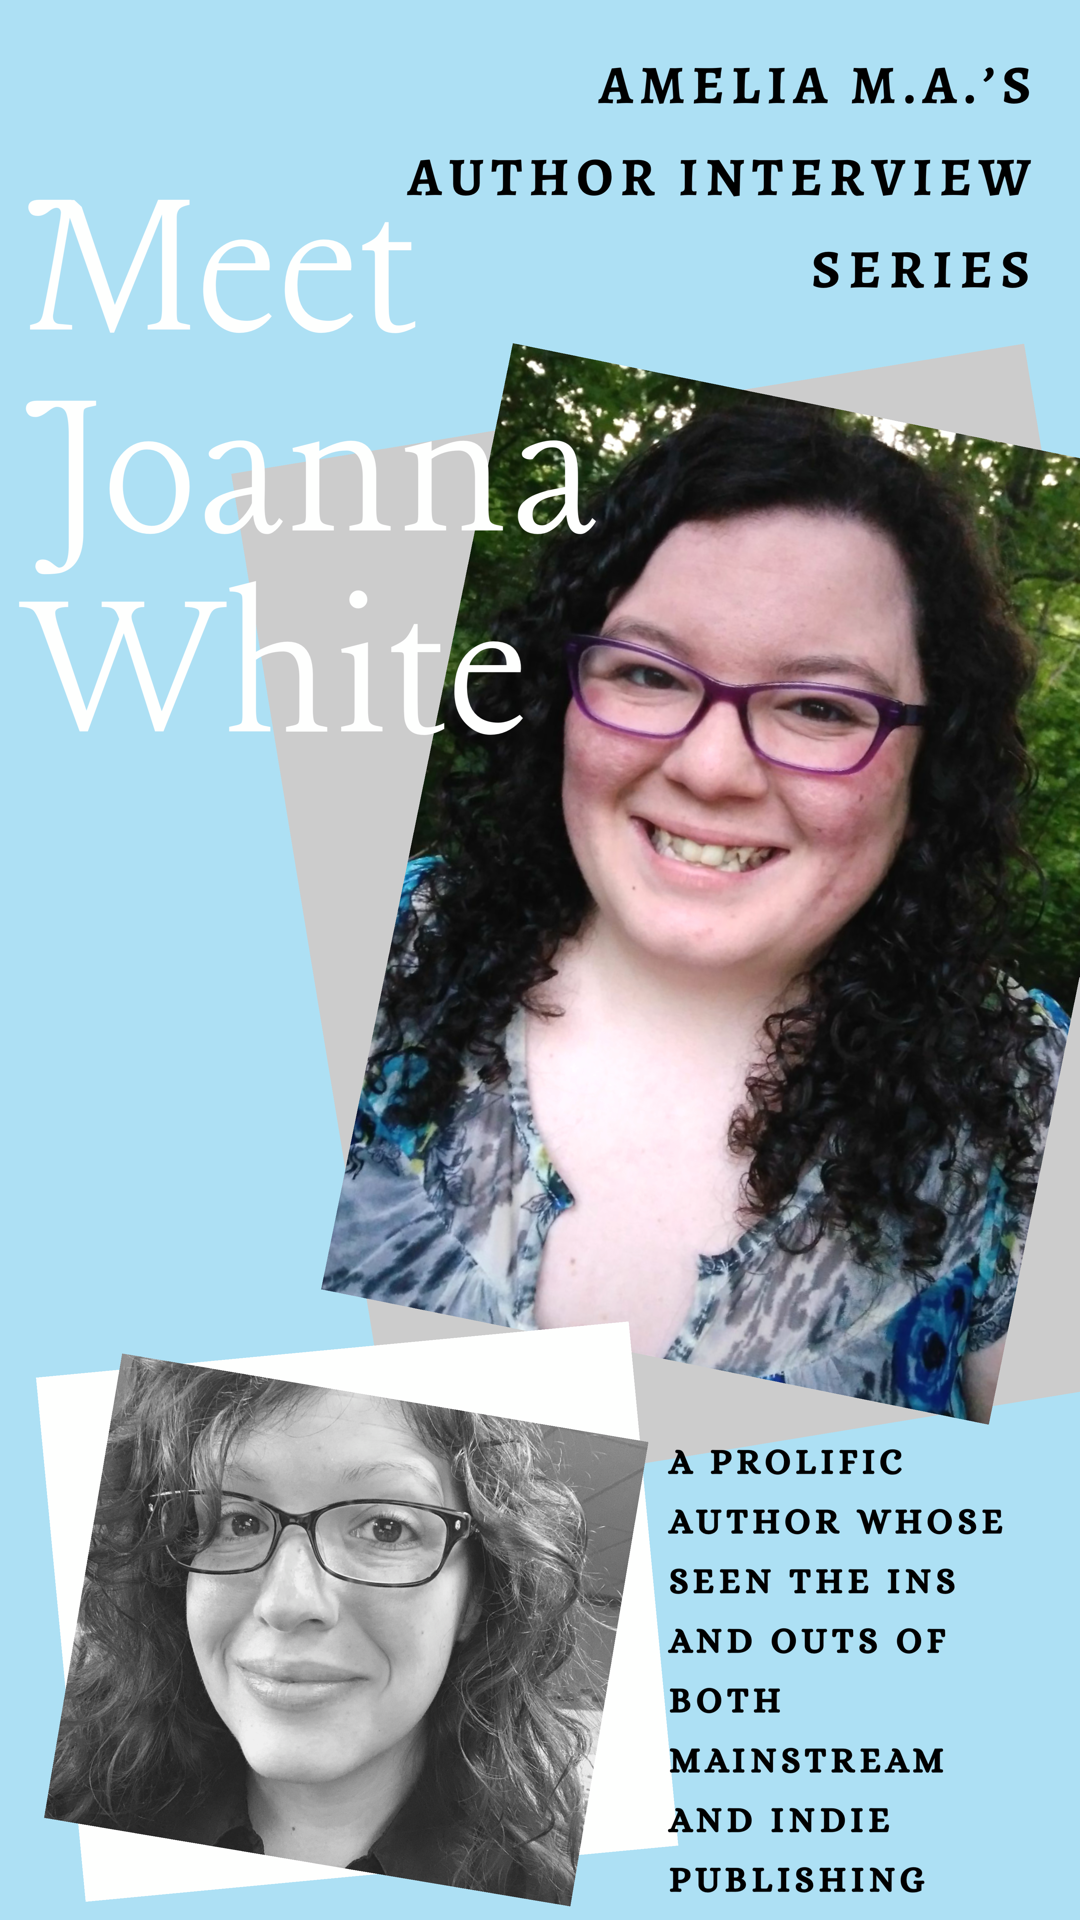 Interviewing author Joanna White